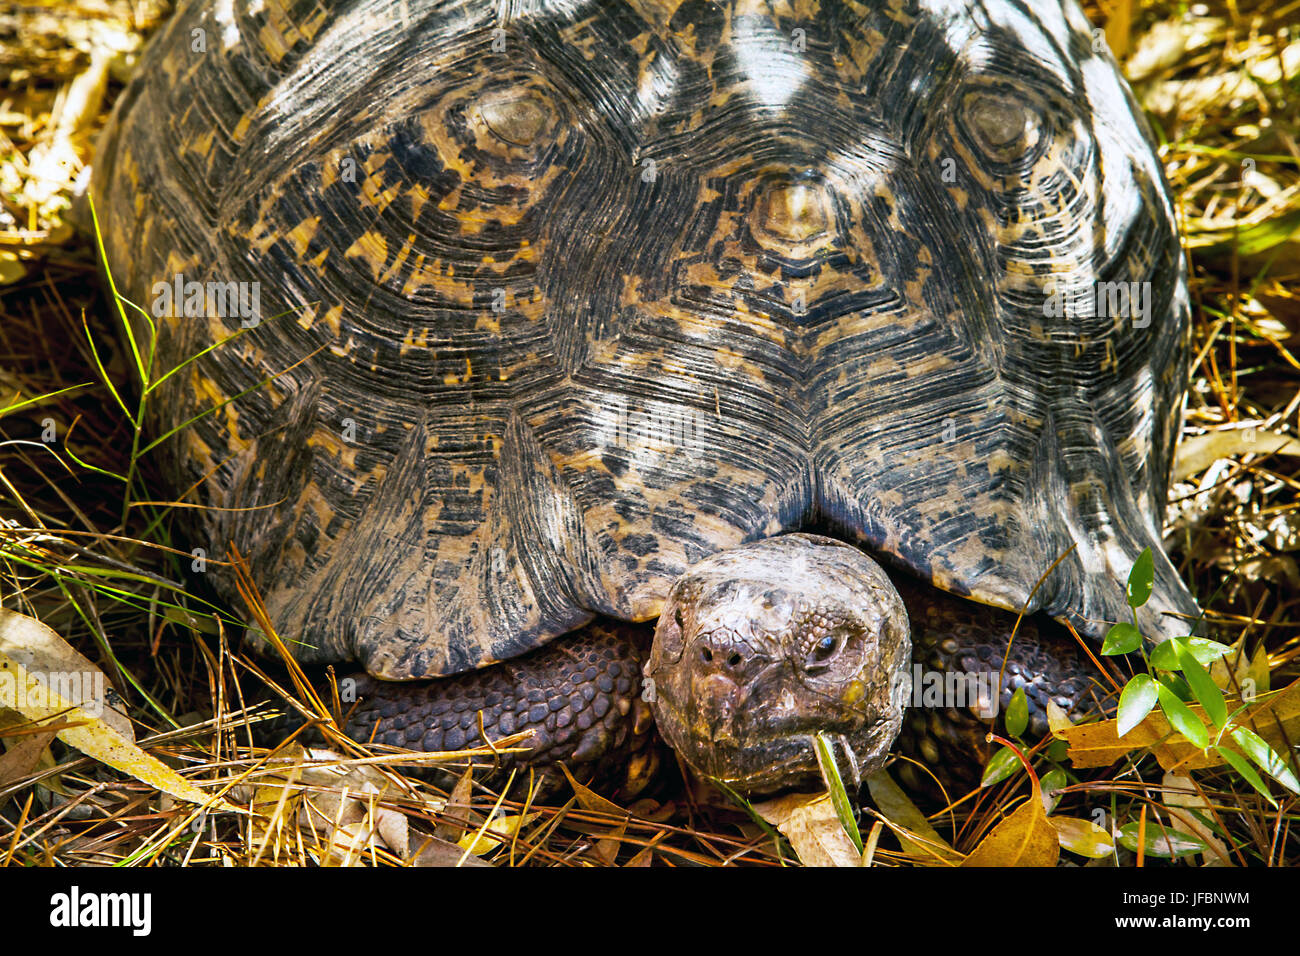 Country turtle in South Africa Stock Photo